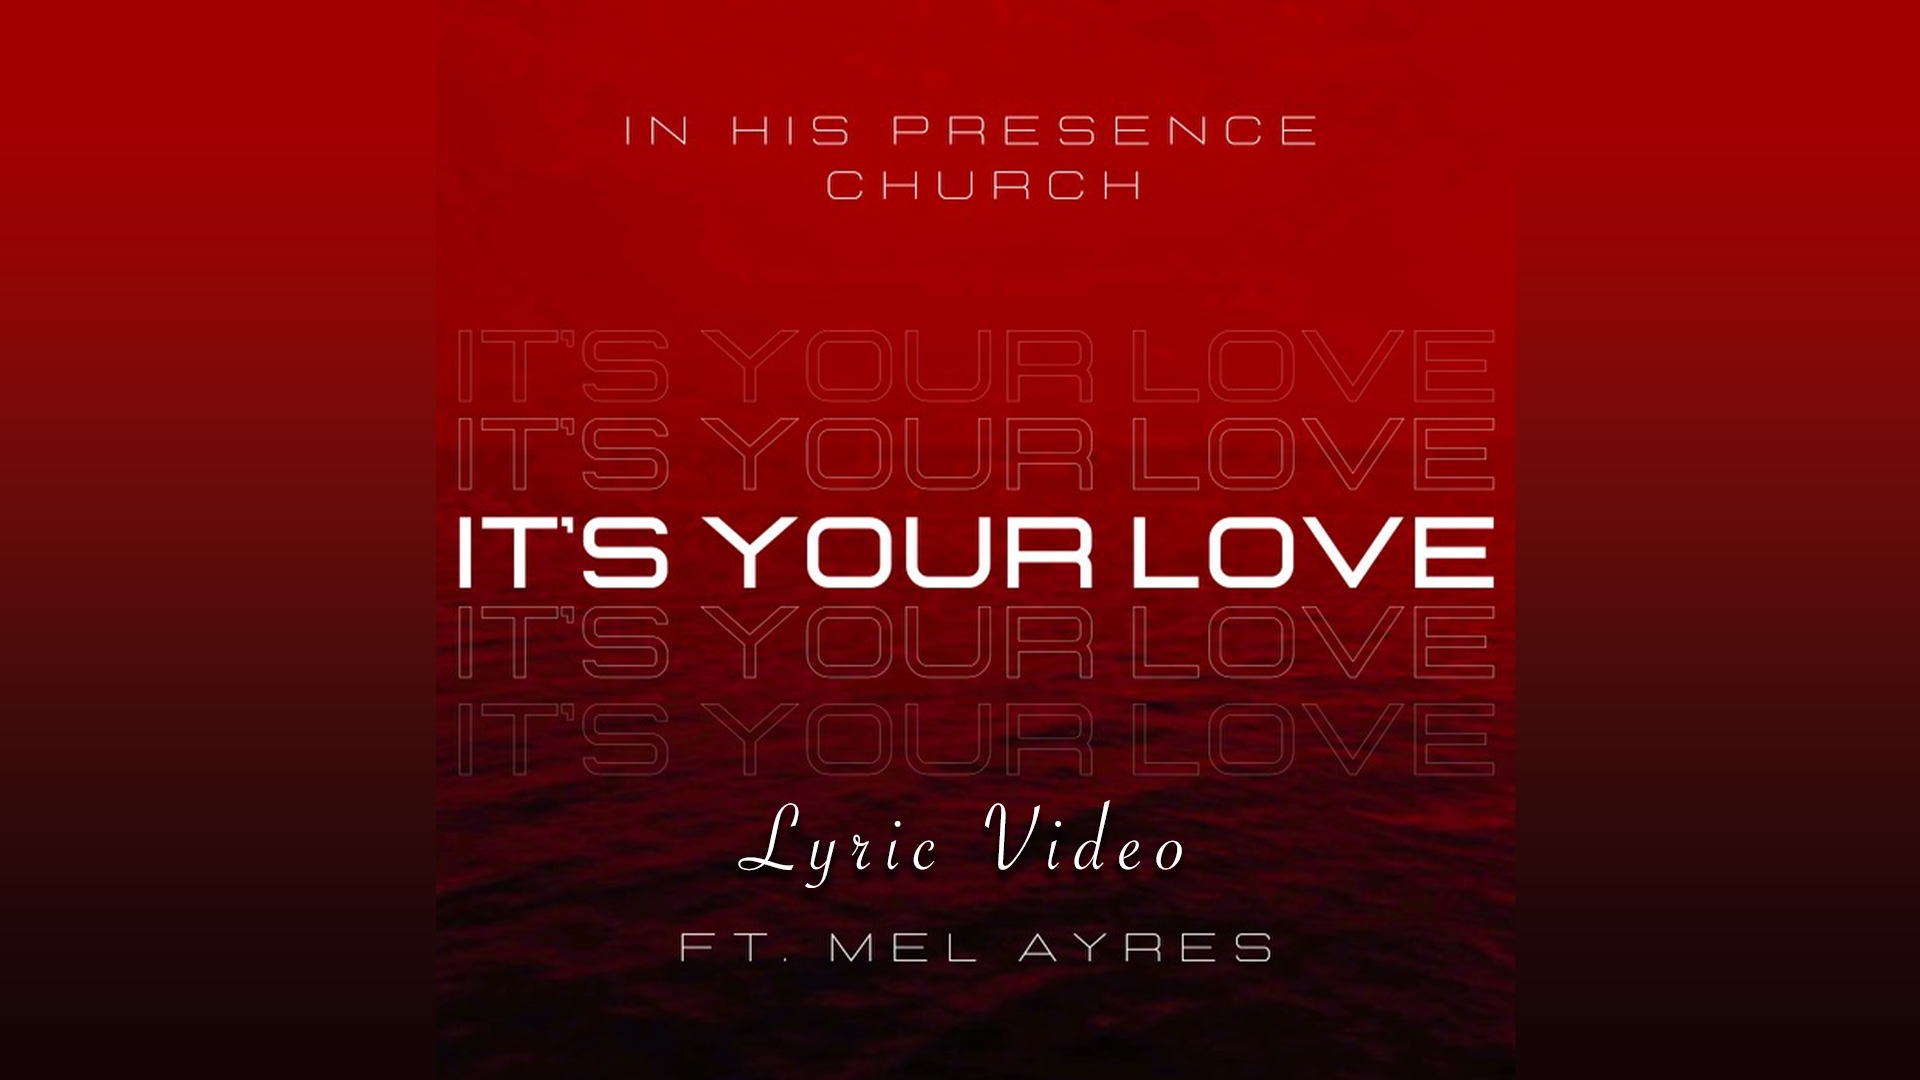 ITS YOUR LOVE LYRIC VIDEO THUMBNAIL